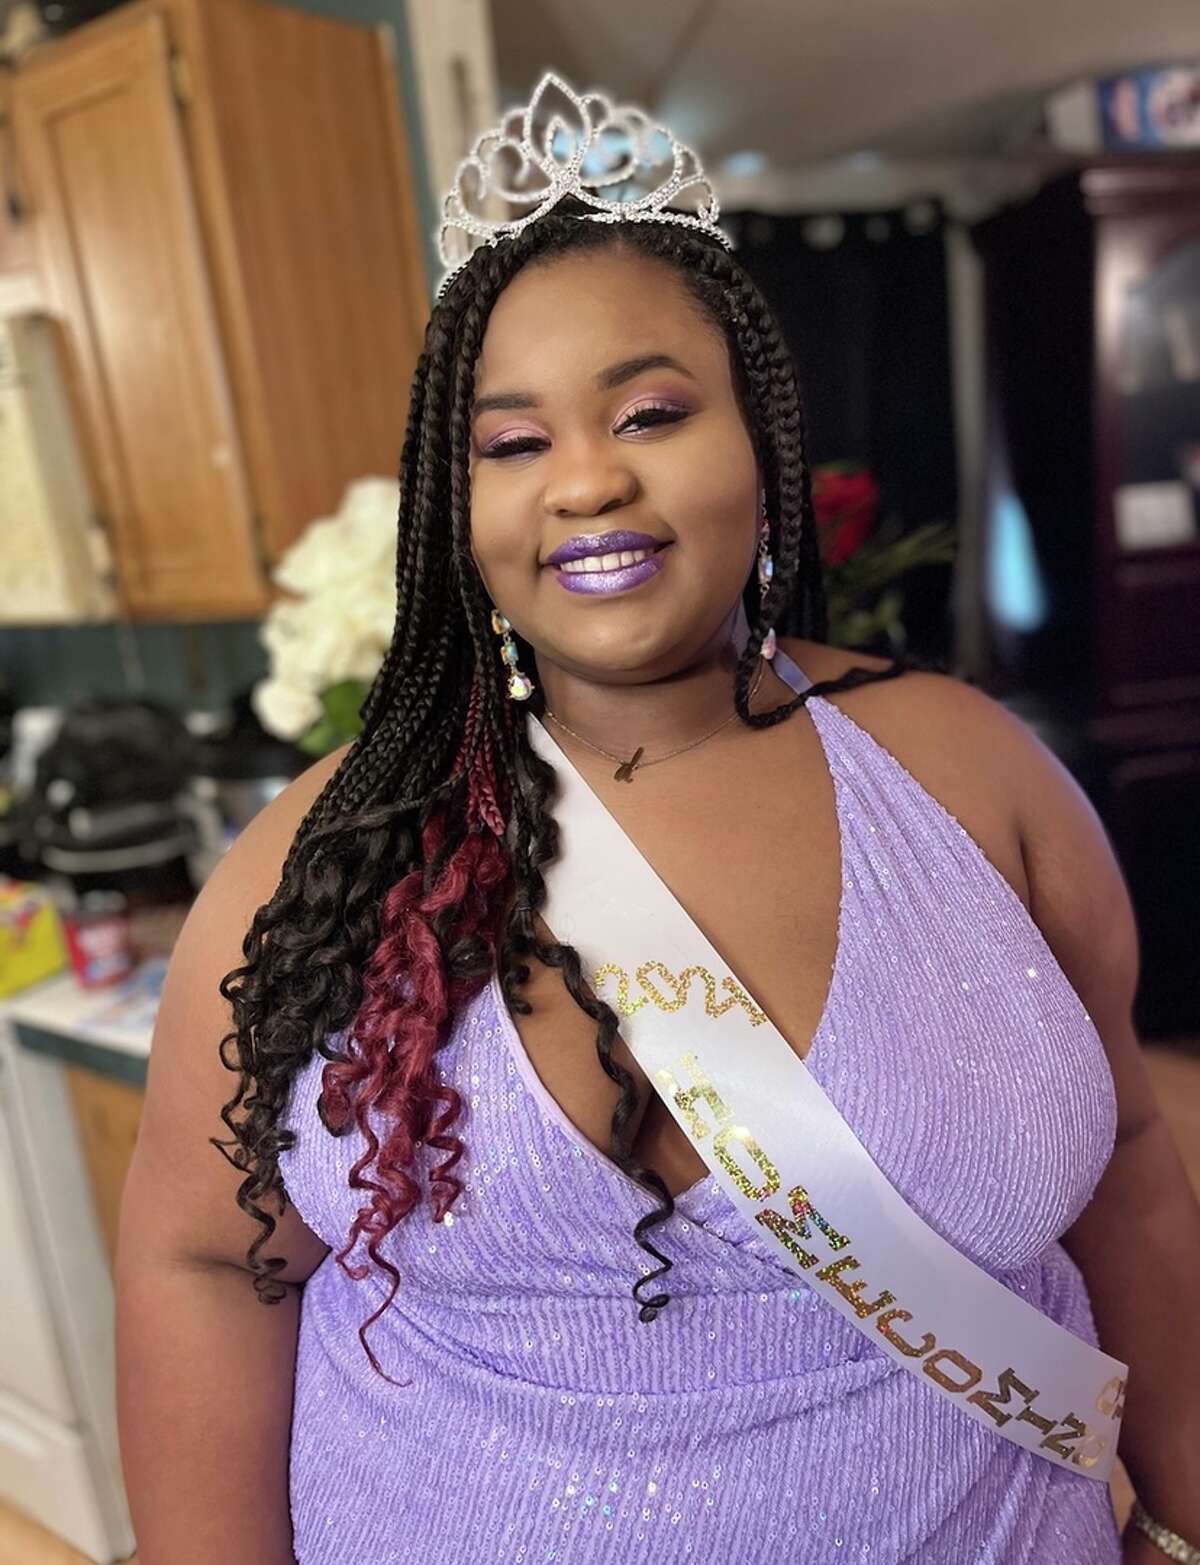 Class of 2022 Tomball High School graduate Diamond Doakes was crowned Homecoming Queen in September 2021.